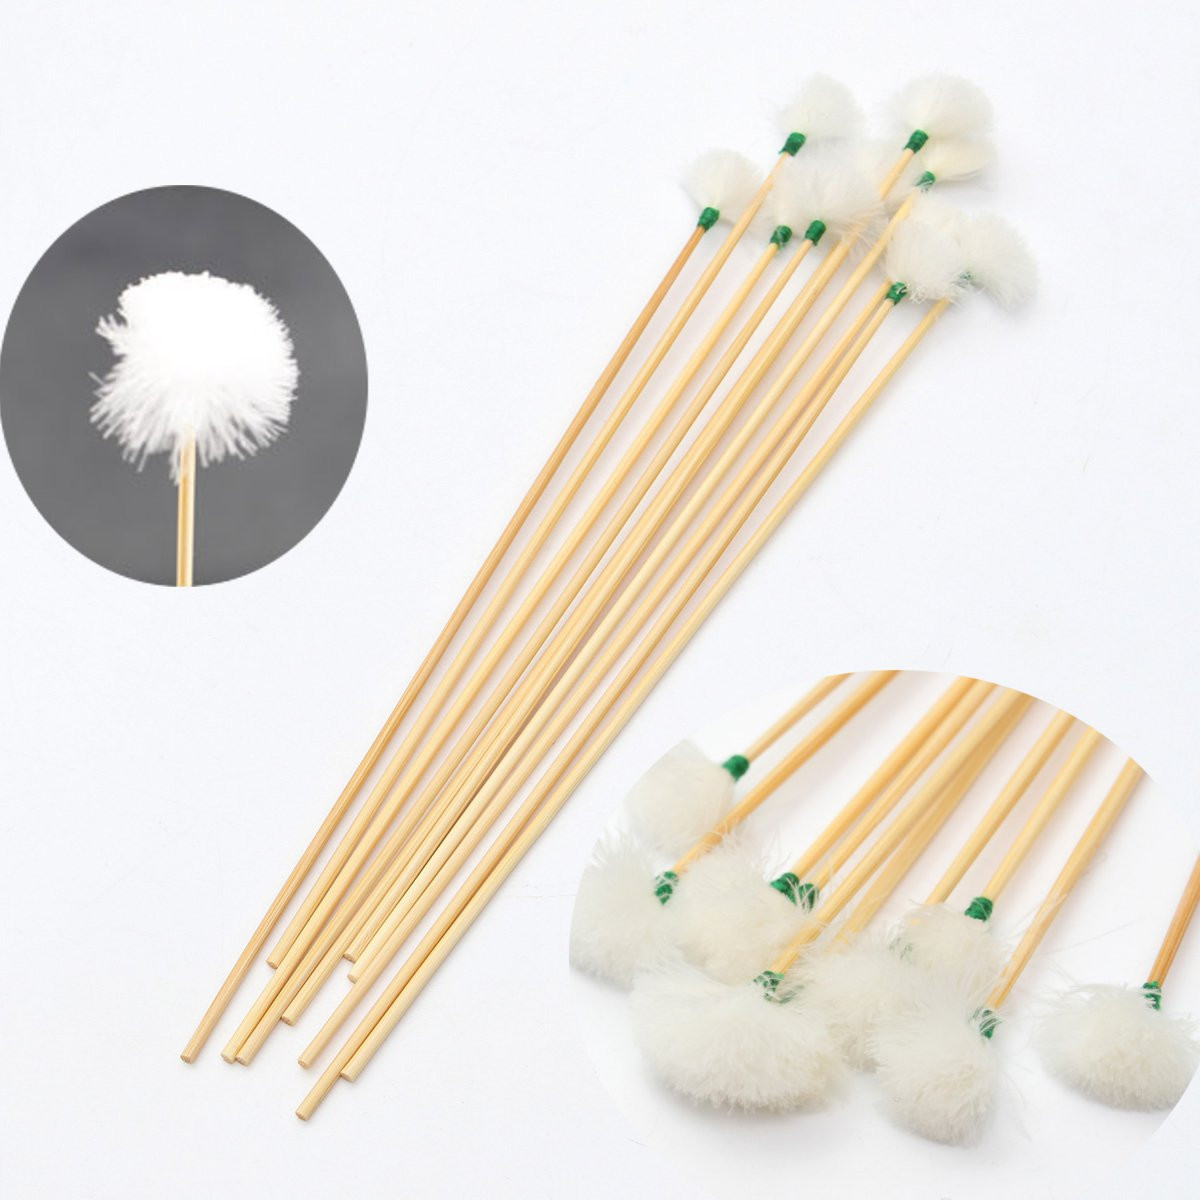 

LuckyFine 10pcs Swansdown Earpick Ear Pick Wax Cleaner Removal Tool Bamboo Stick Remover